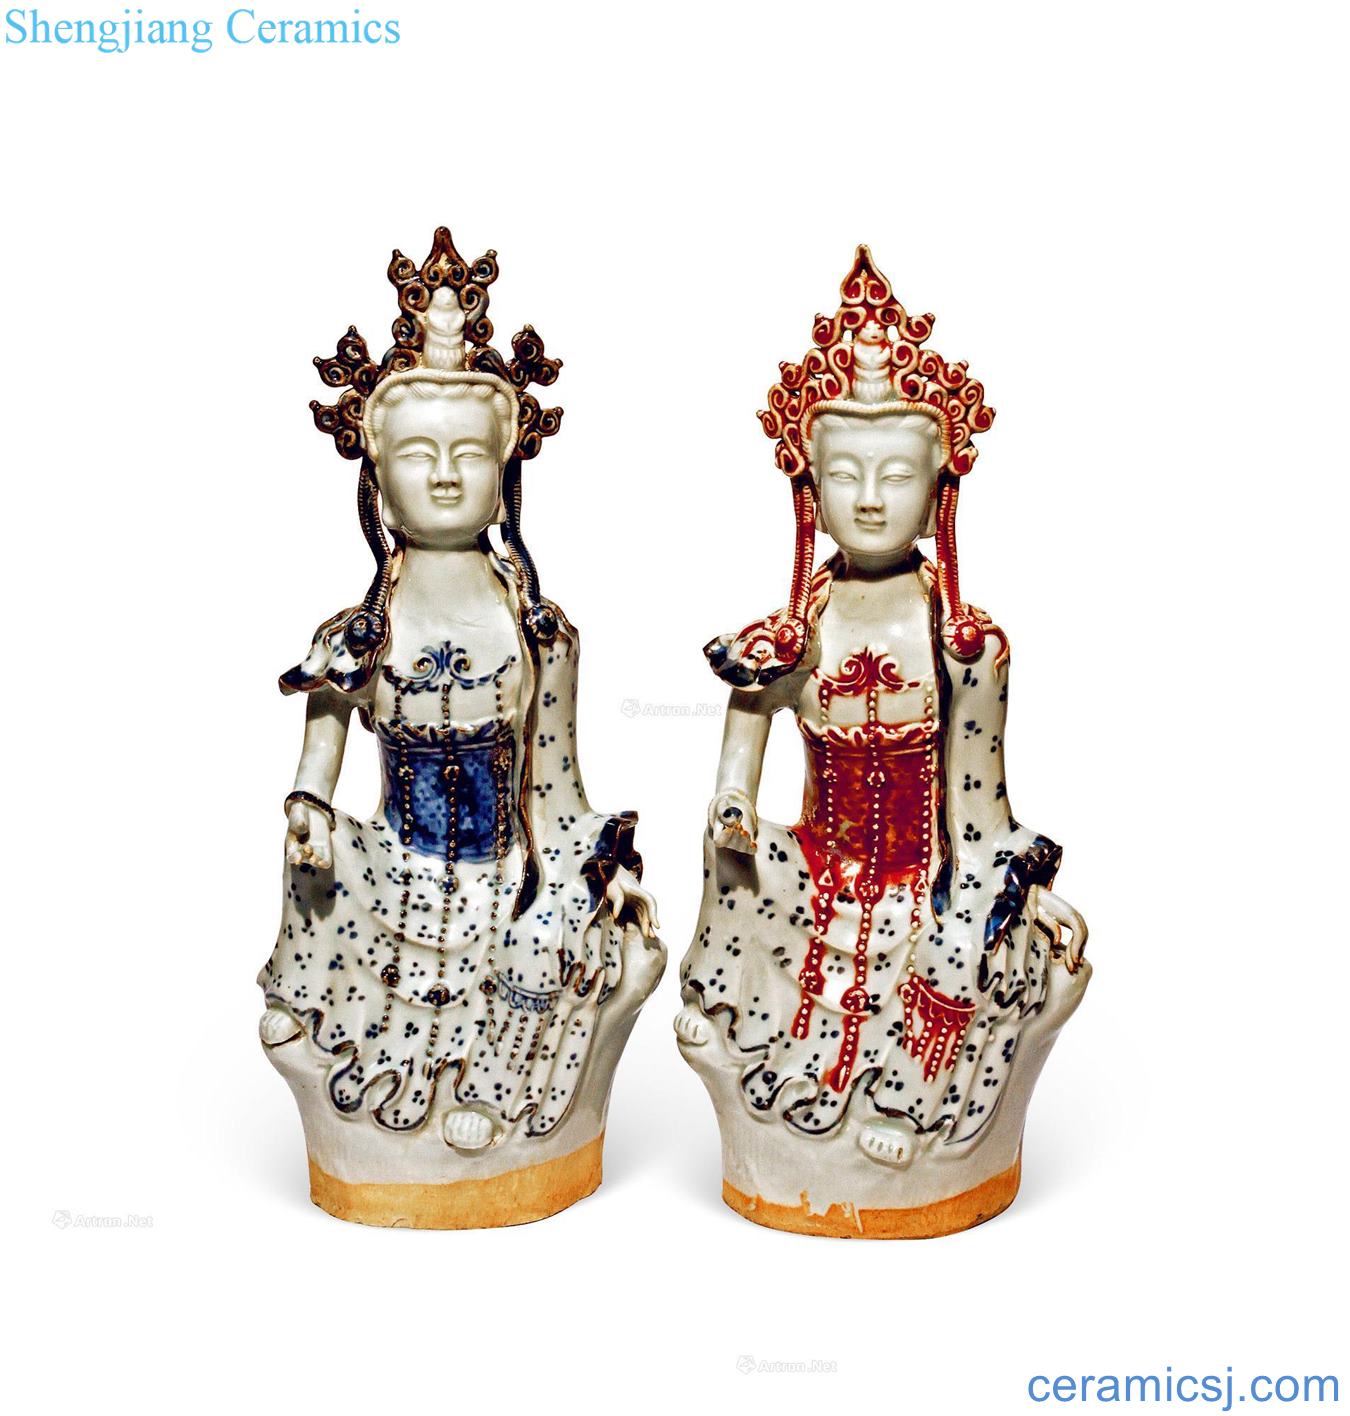 The yuan dynasty blue-and-white and youligong guanyin (a)